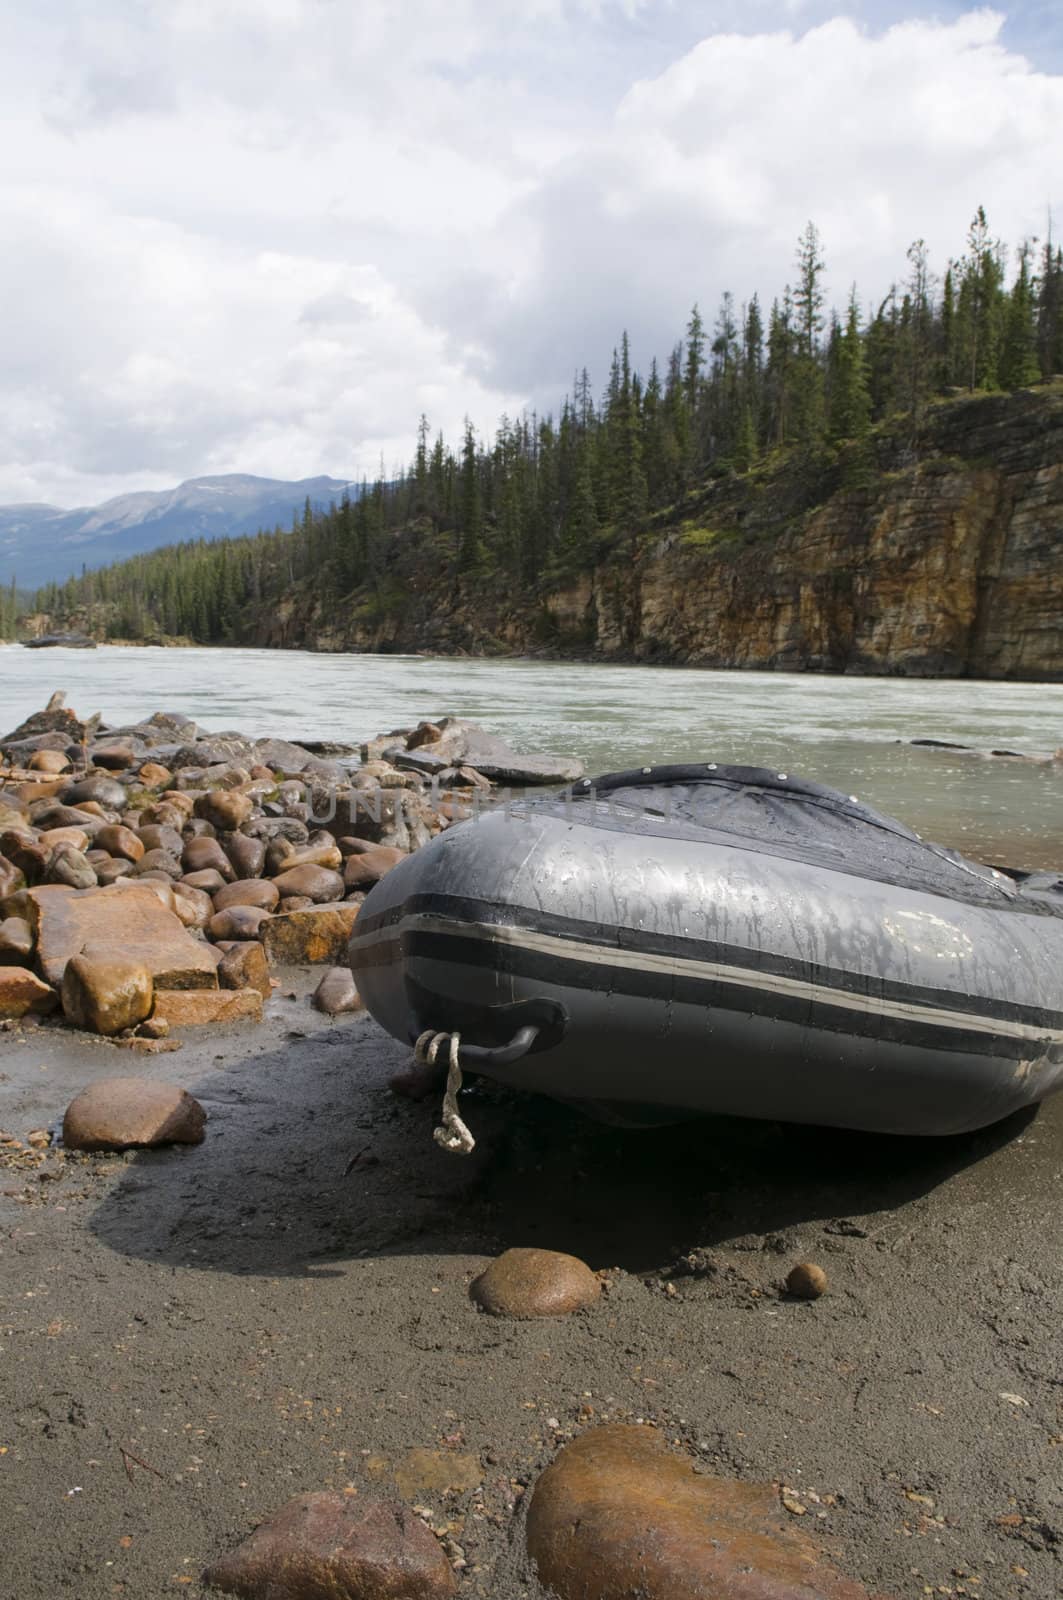 Raft in place for the trip down the Athabasca River located in Jasper National Park